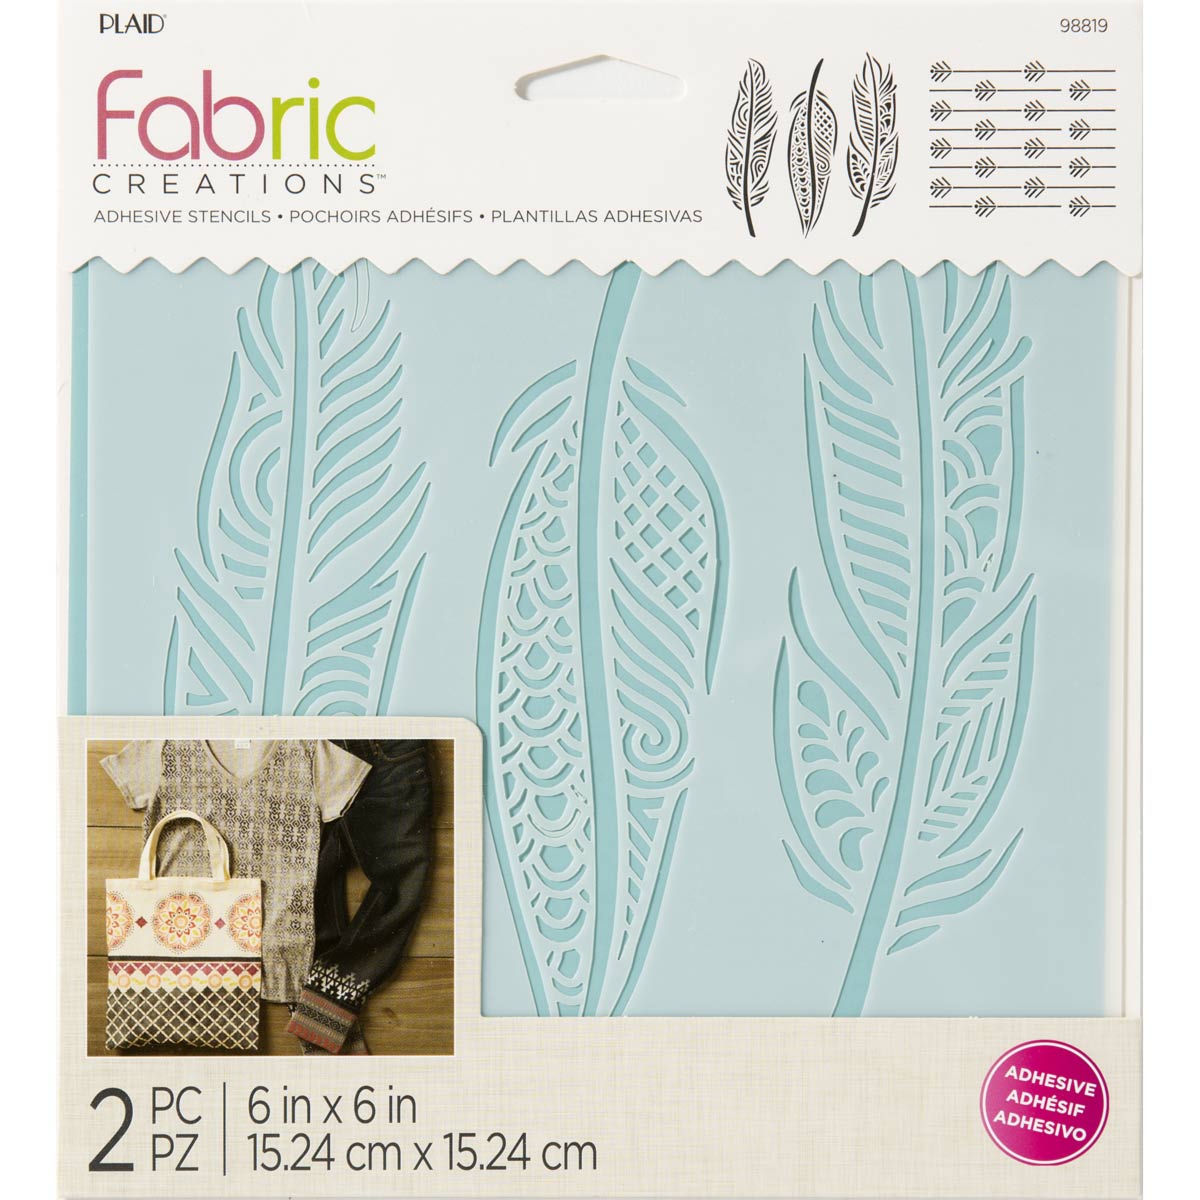 Fabric Creations™ Adhesive Stencils - Feathers, 6